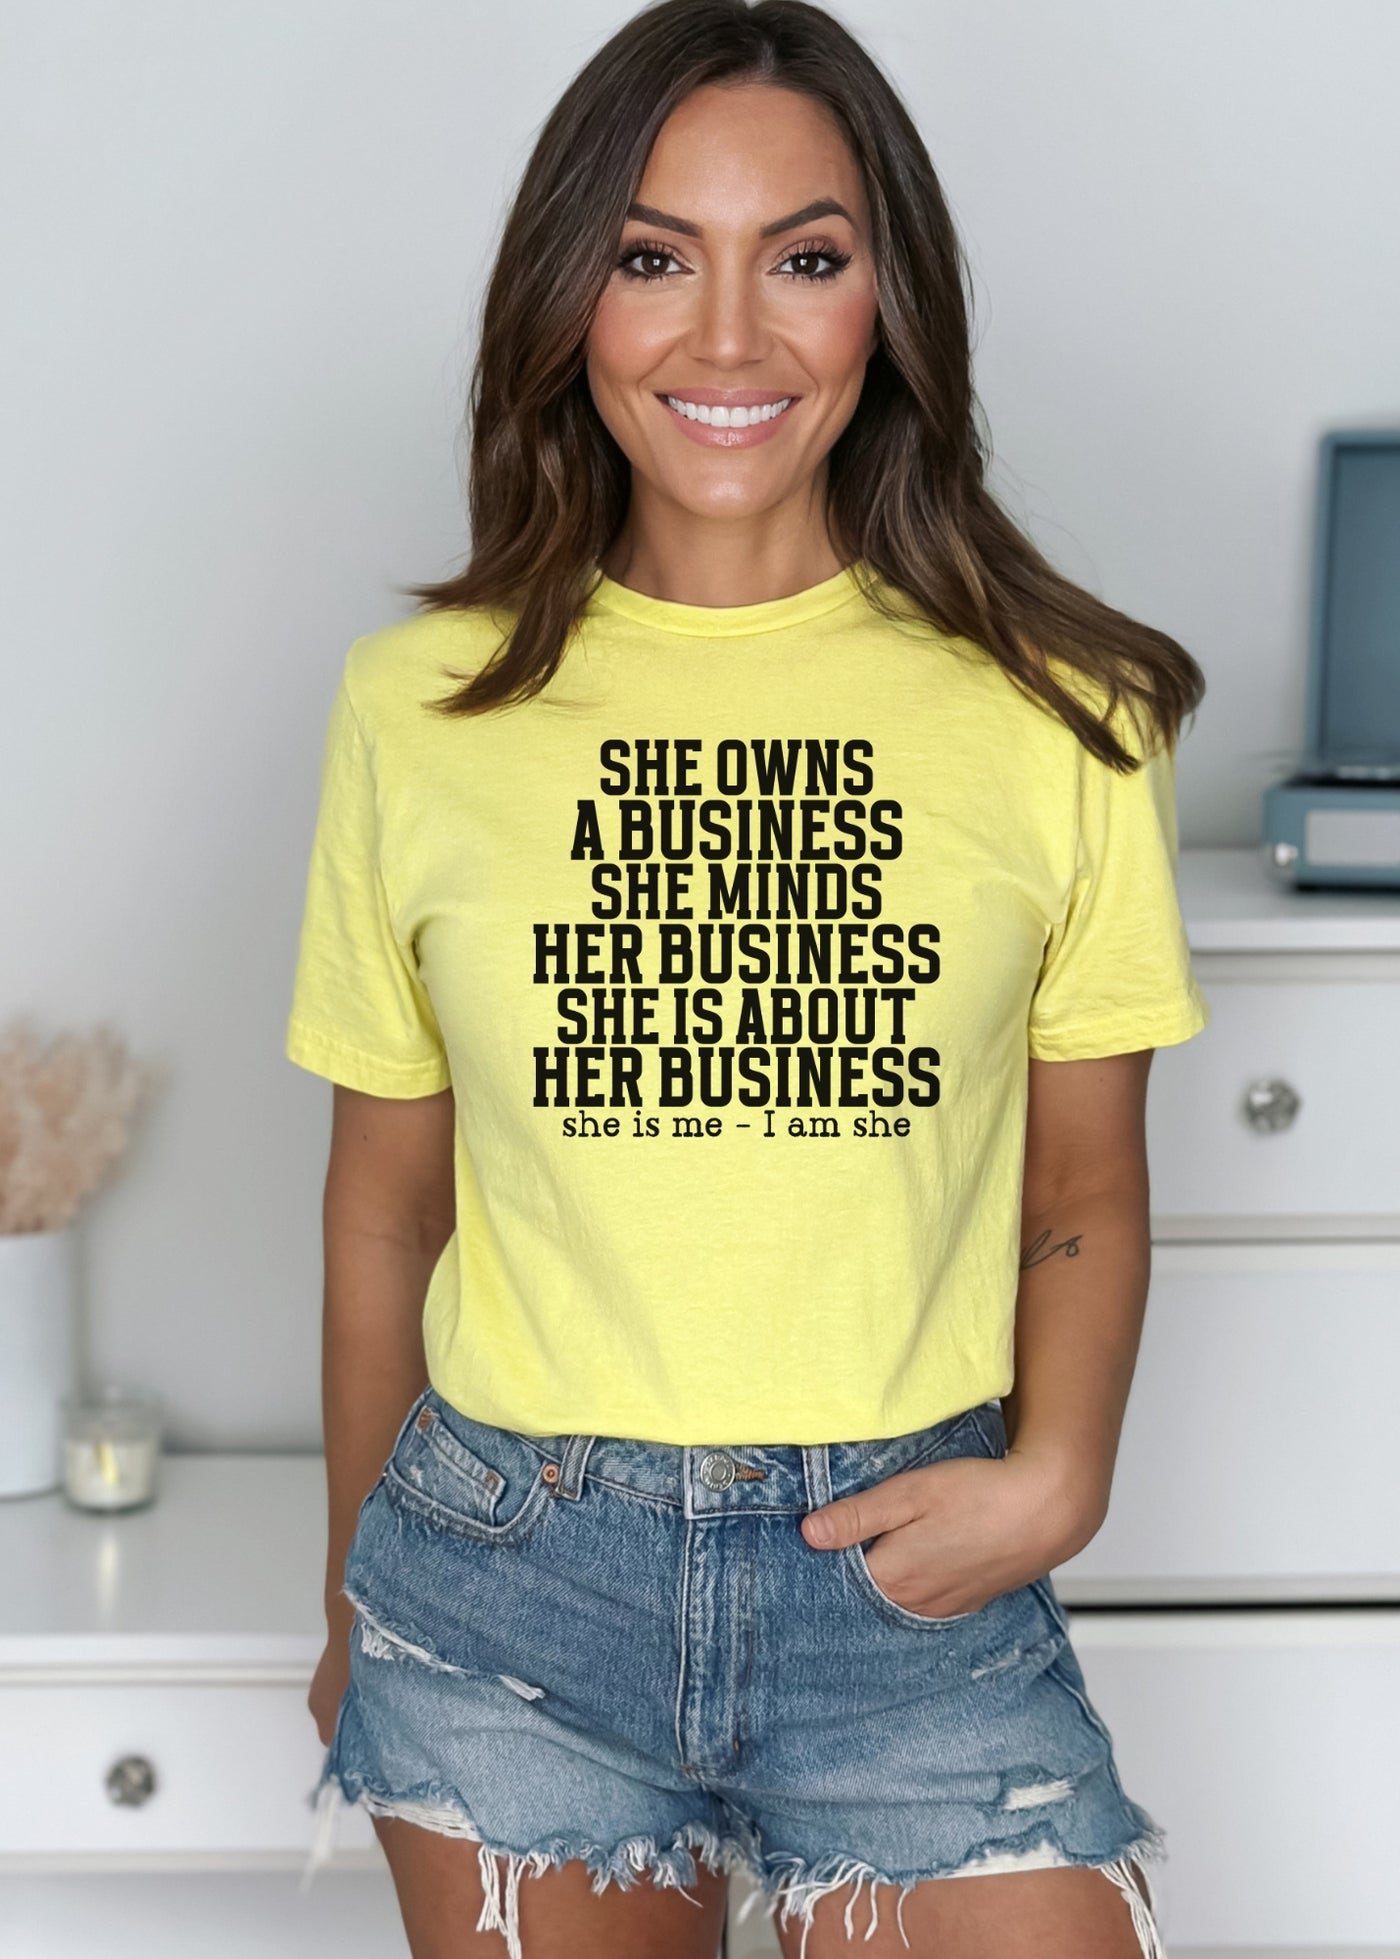 She owns a business